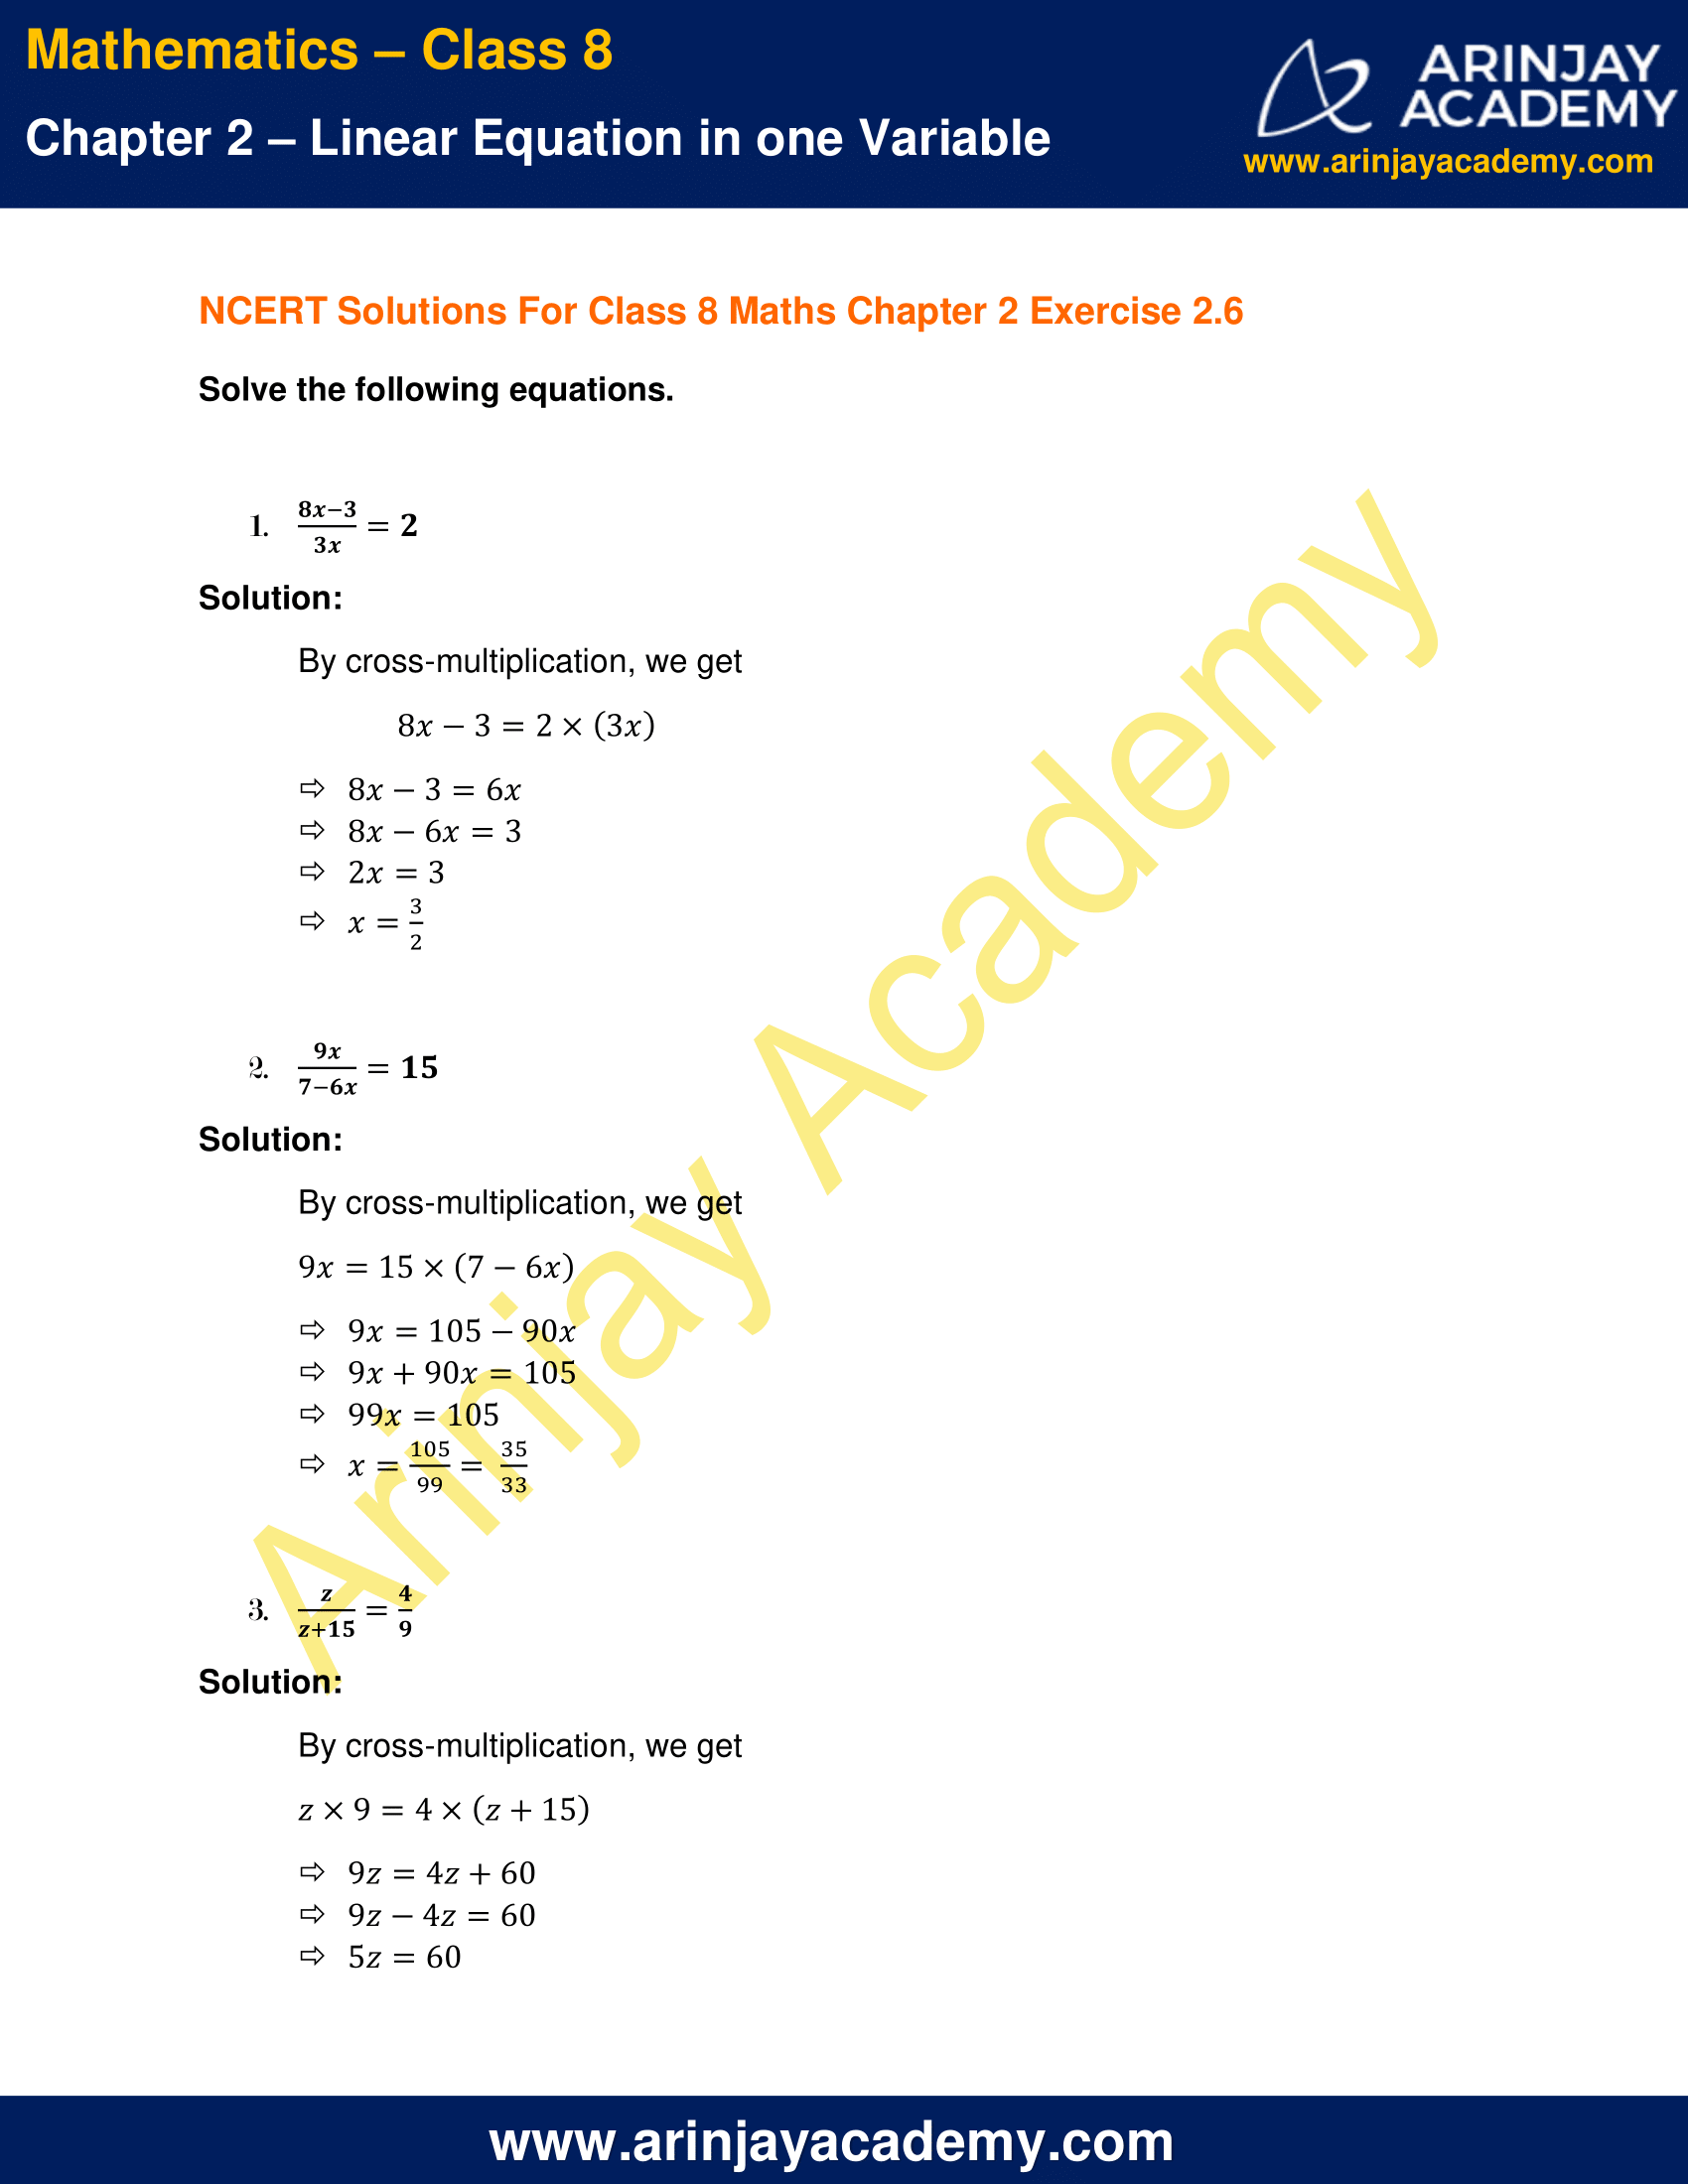 NCERT Solutions for Class 8 Maths Chapter 2 Exercise 2.6 image 1